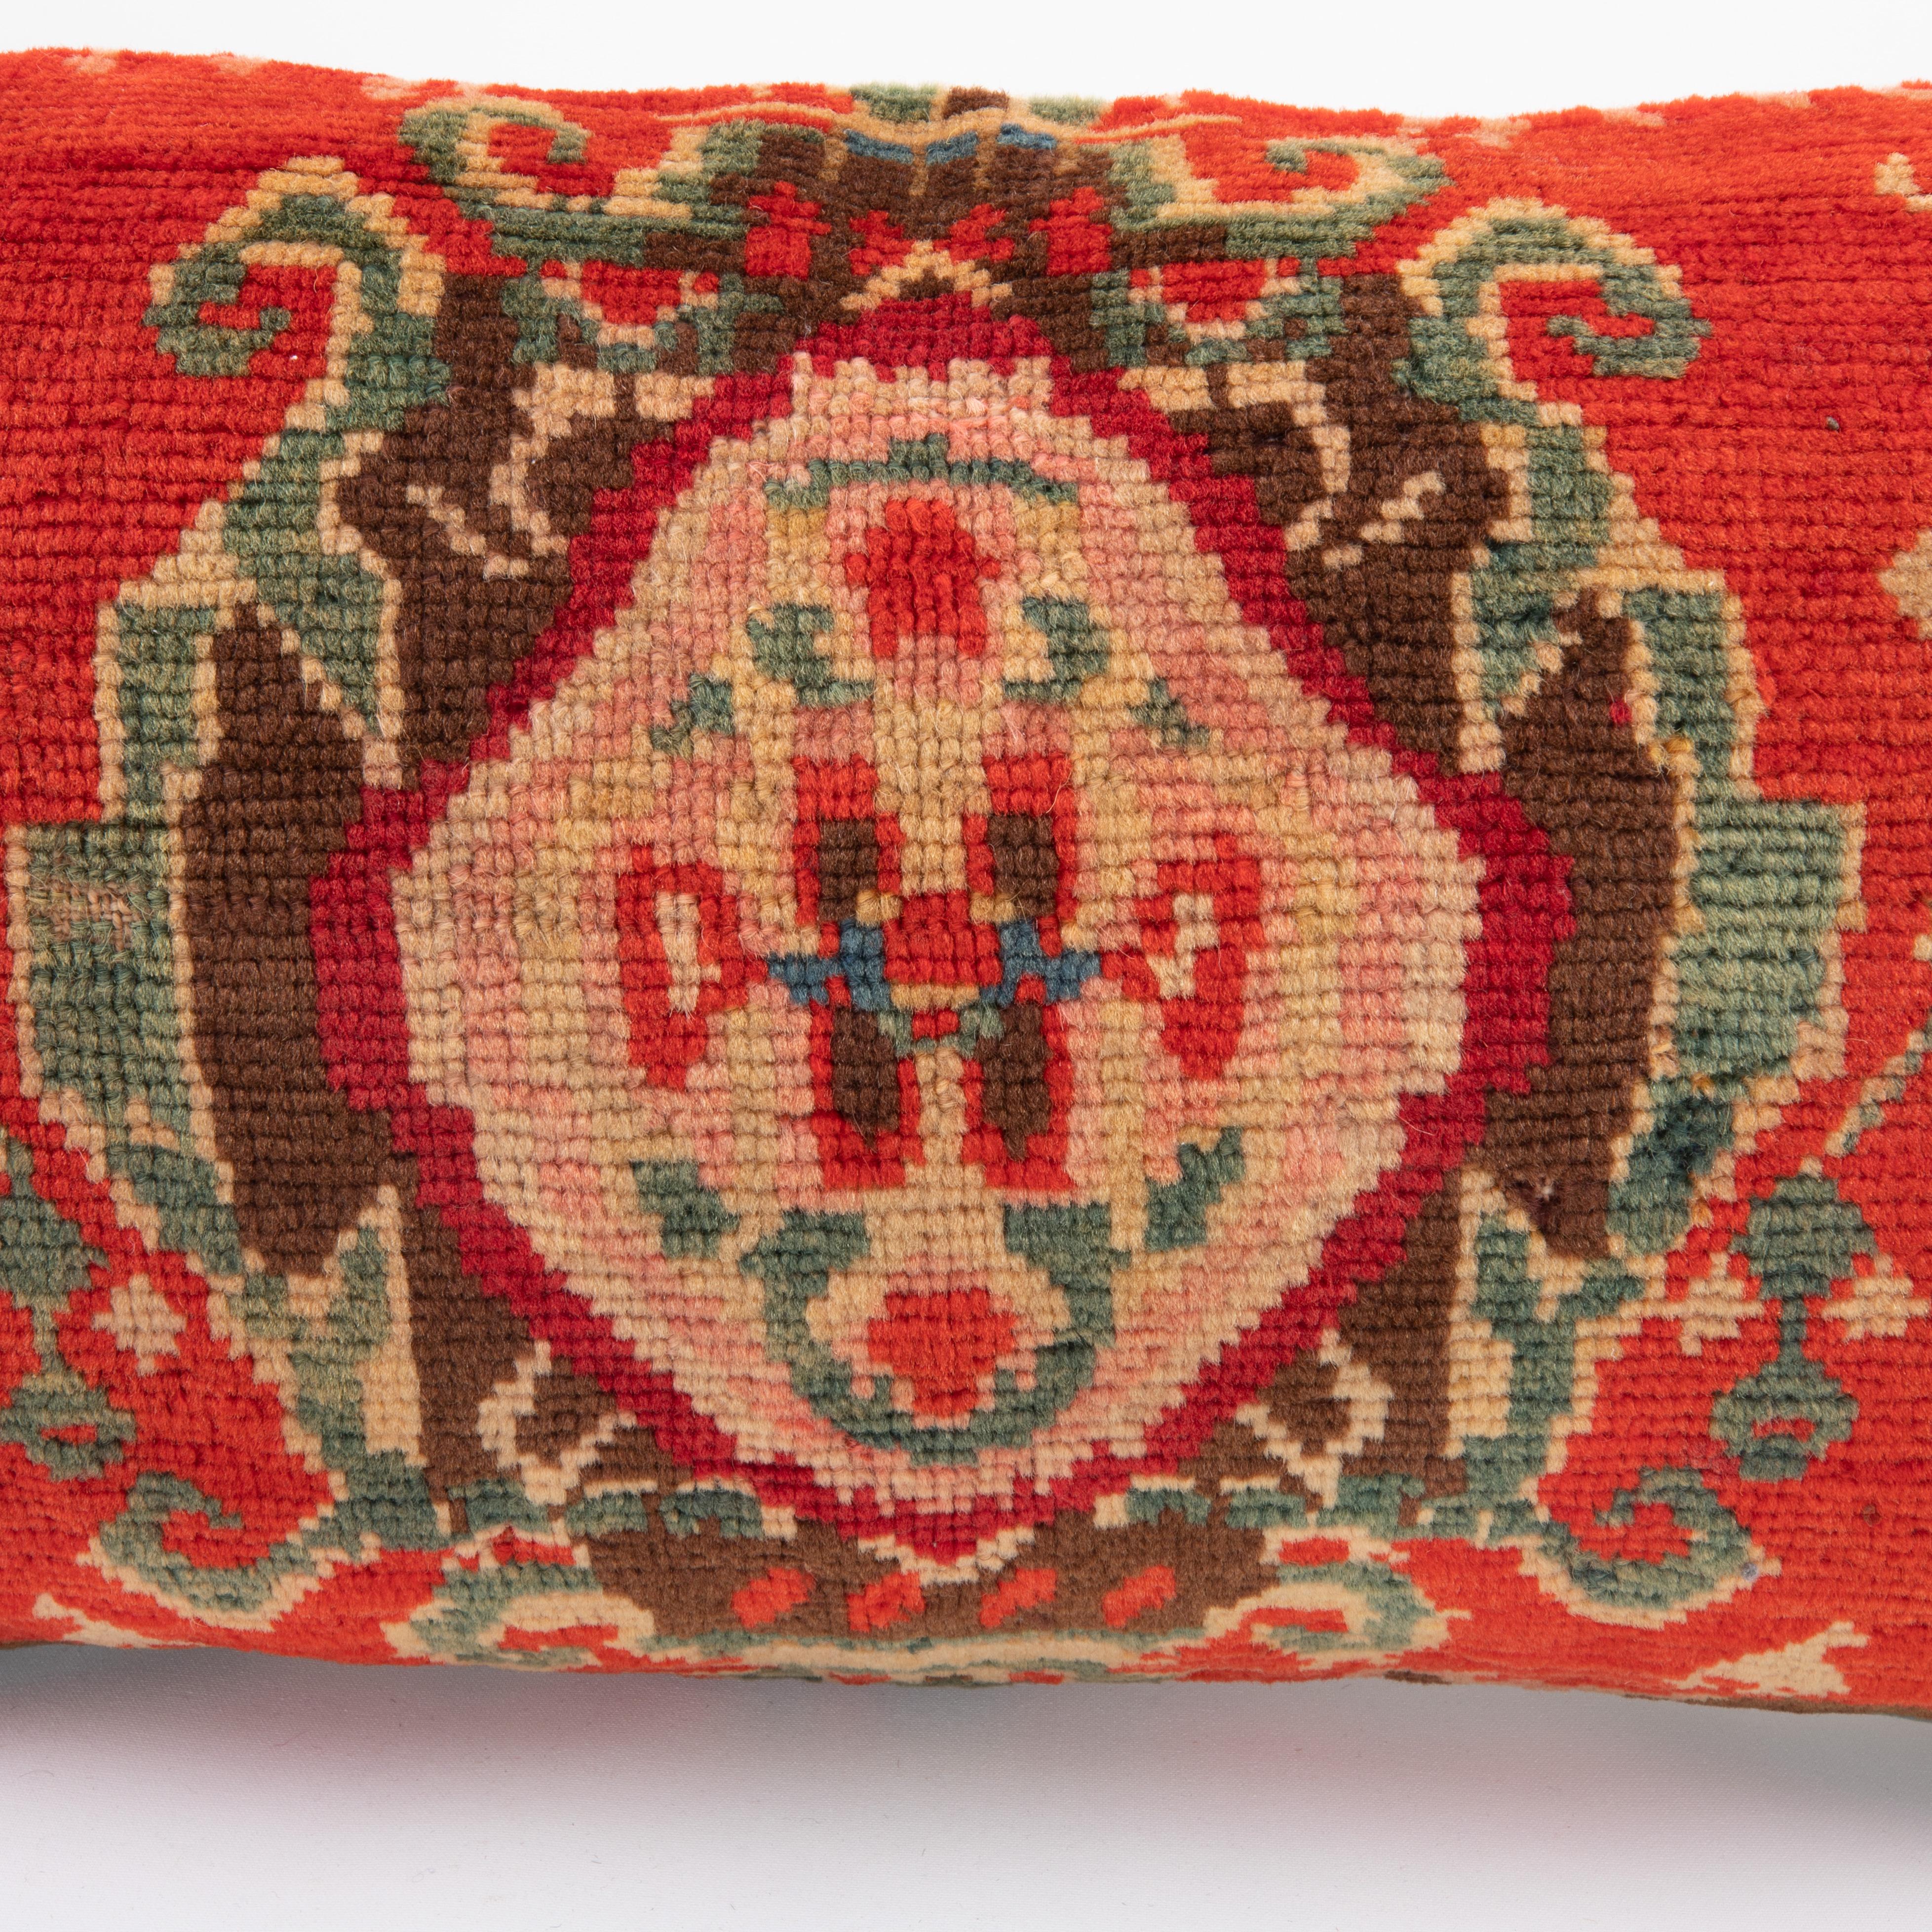 Hand-Woven Pillow Cover Made from a Caucasian Karabagh Rug, late 19th / Early 20th C. For Sale